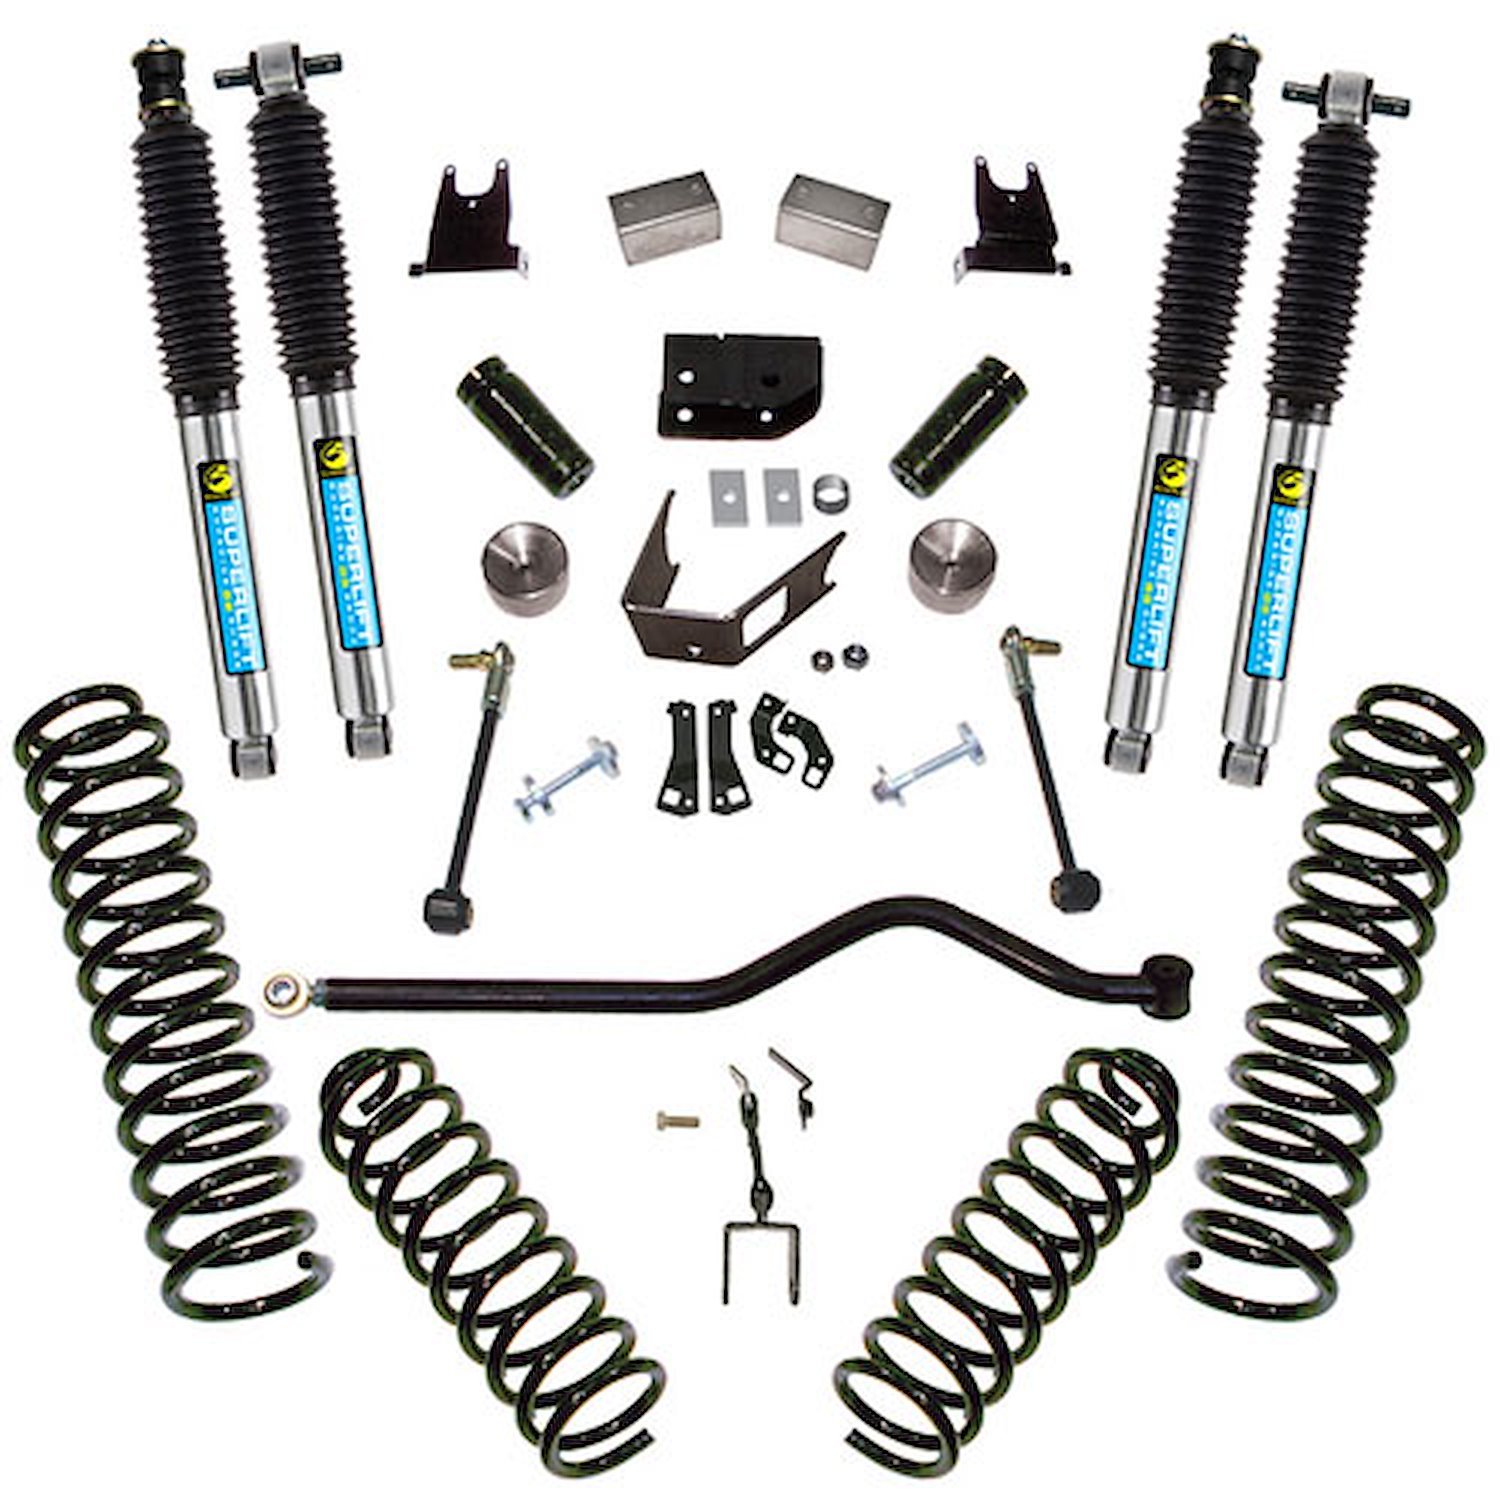 K928B Front and Rear Suspension Lift Kit, Lift Amount: 4 in. Front/4 in. Rear